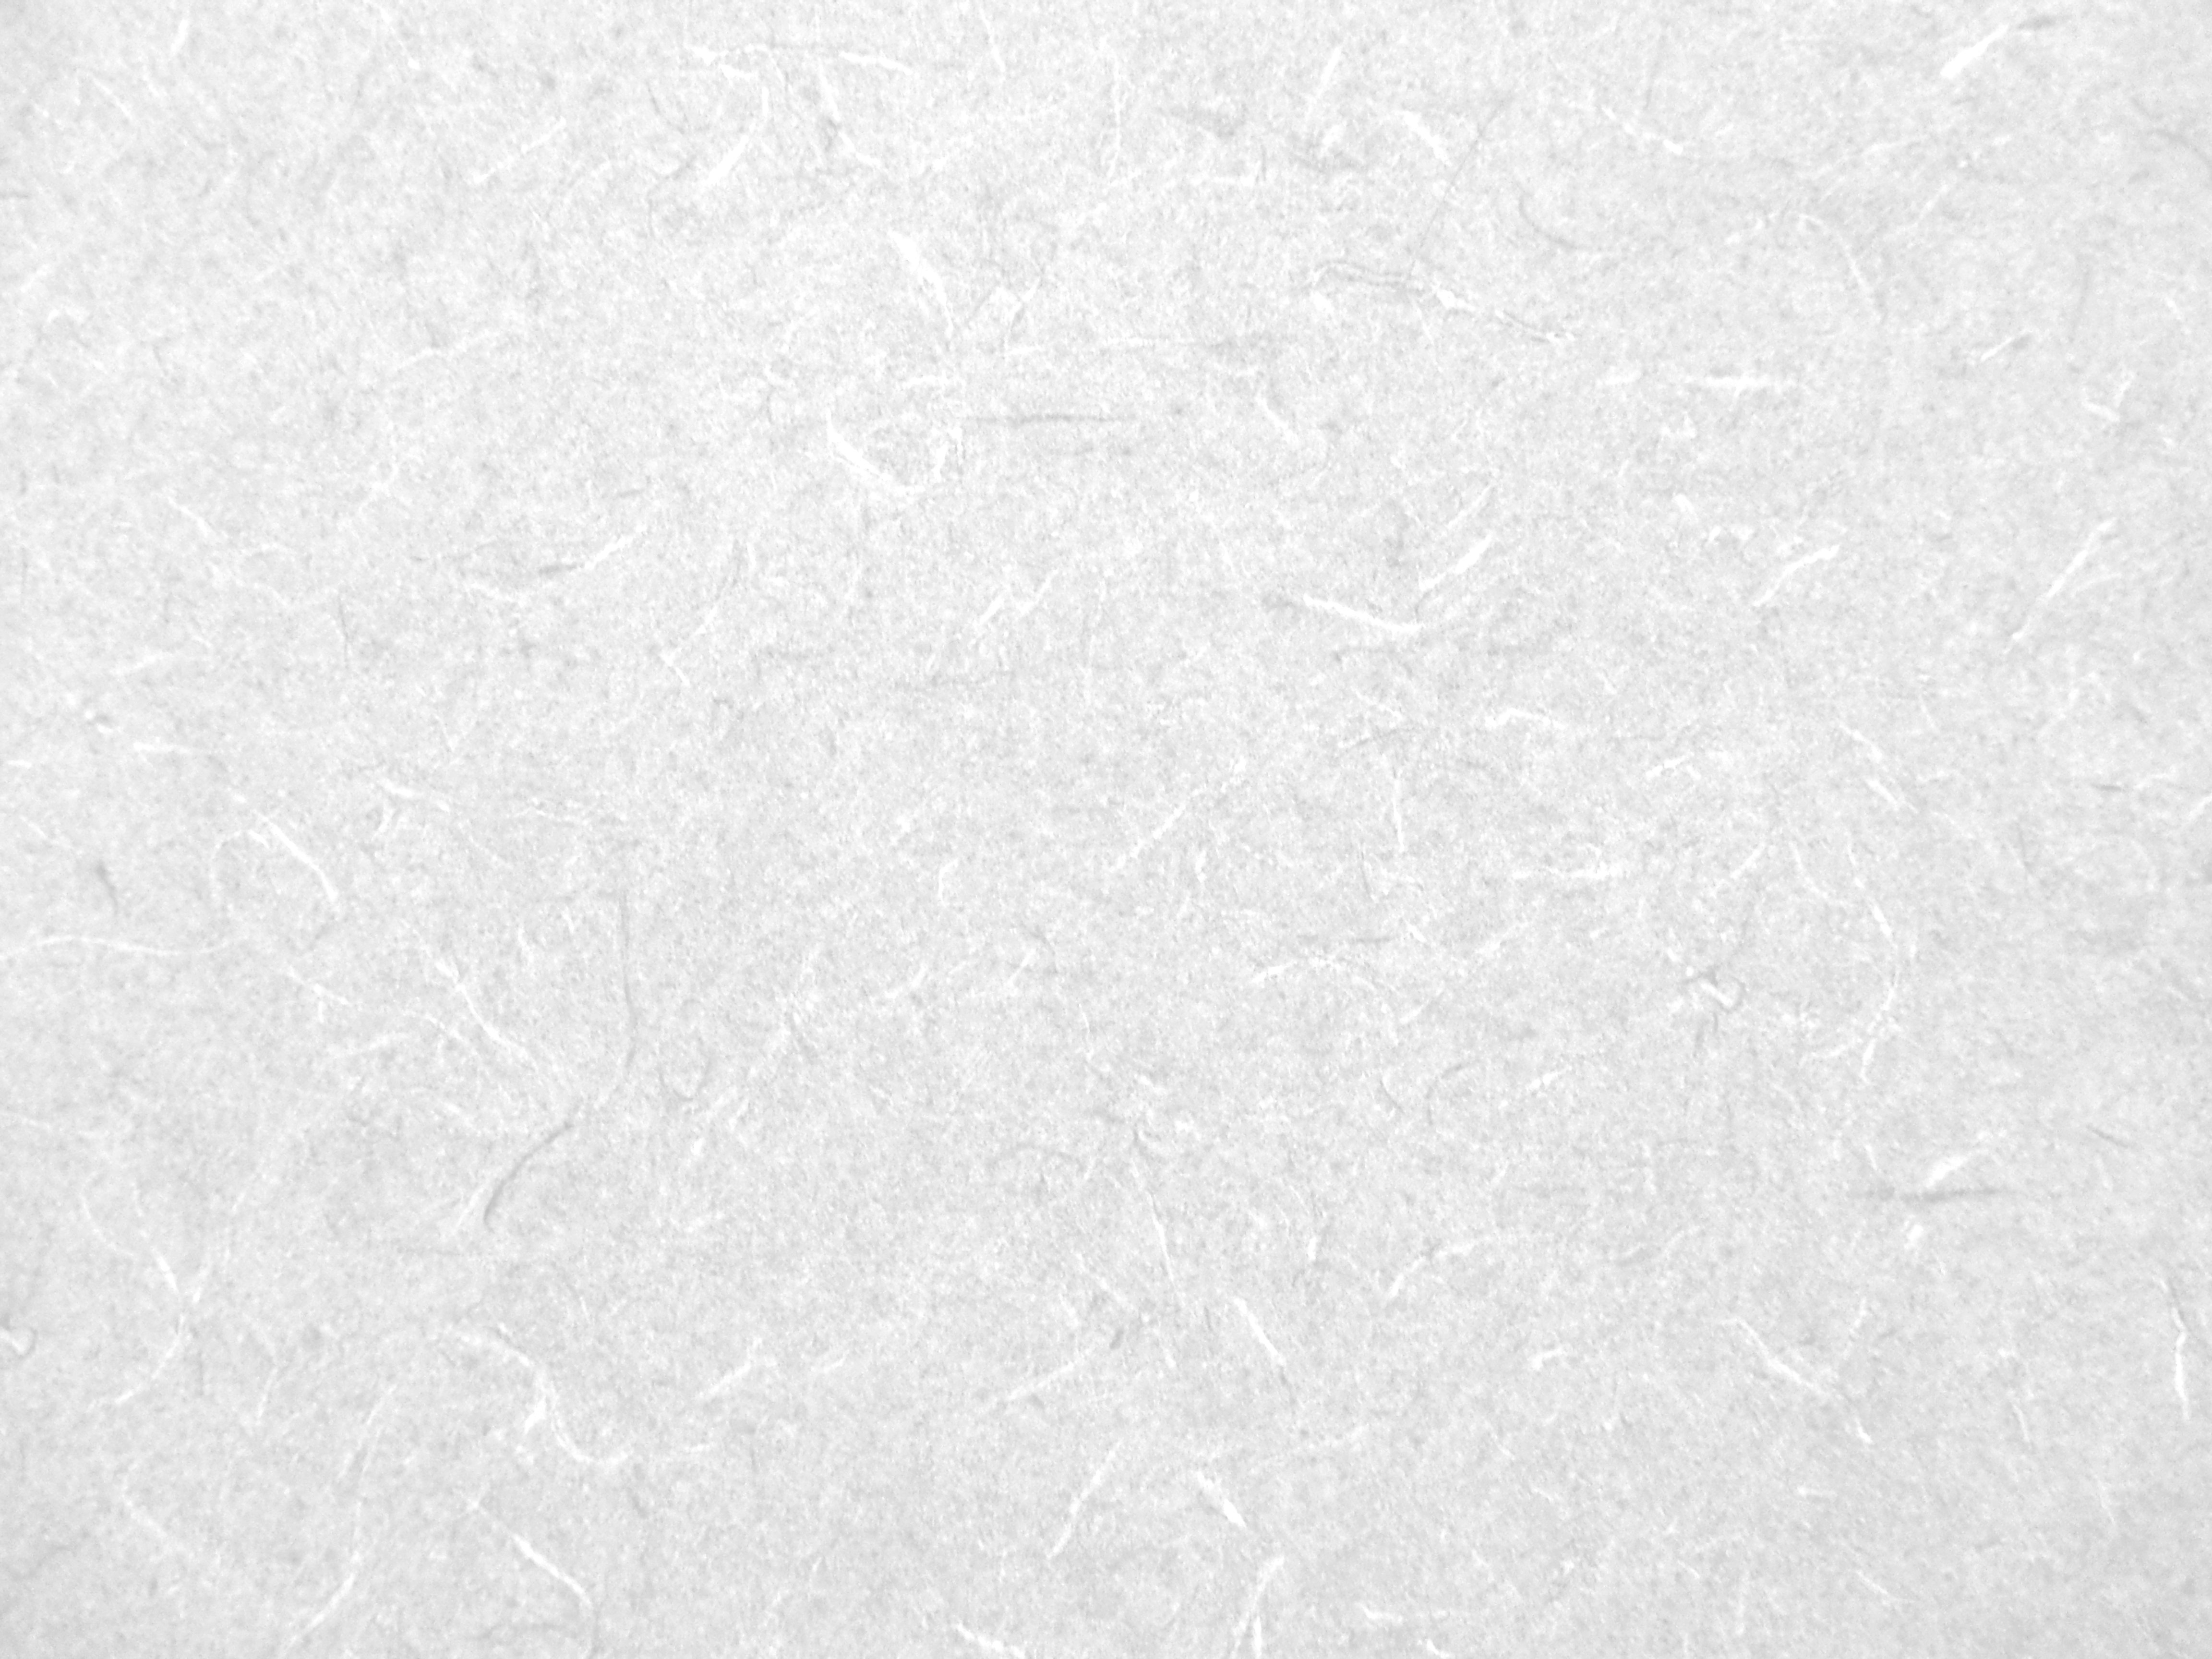 White Cardboard Texture Images Crazy Gallery 4608x3456